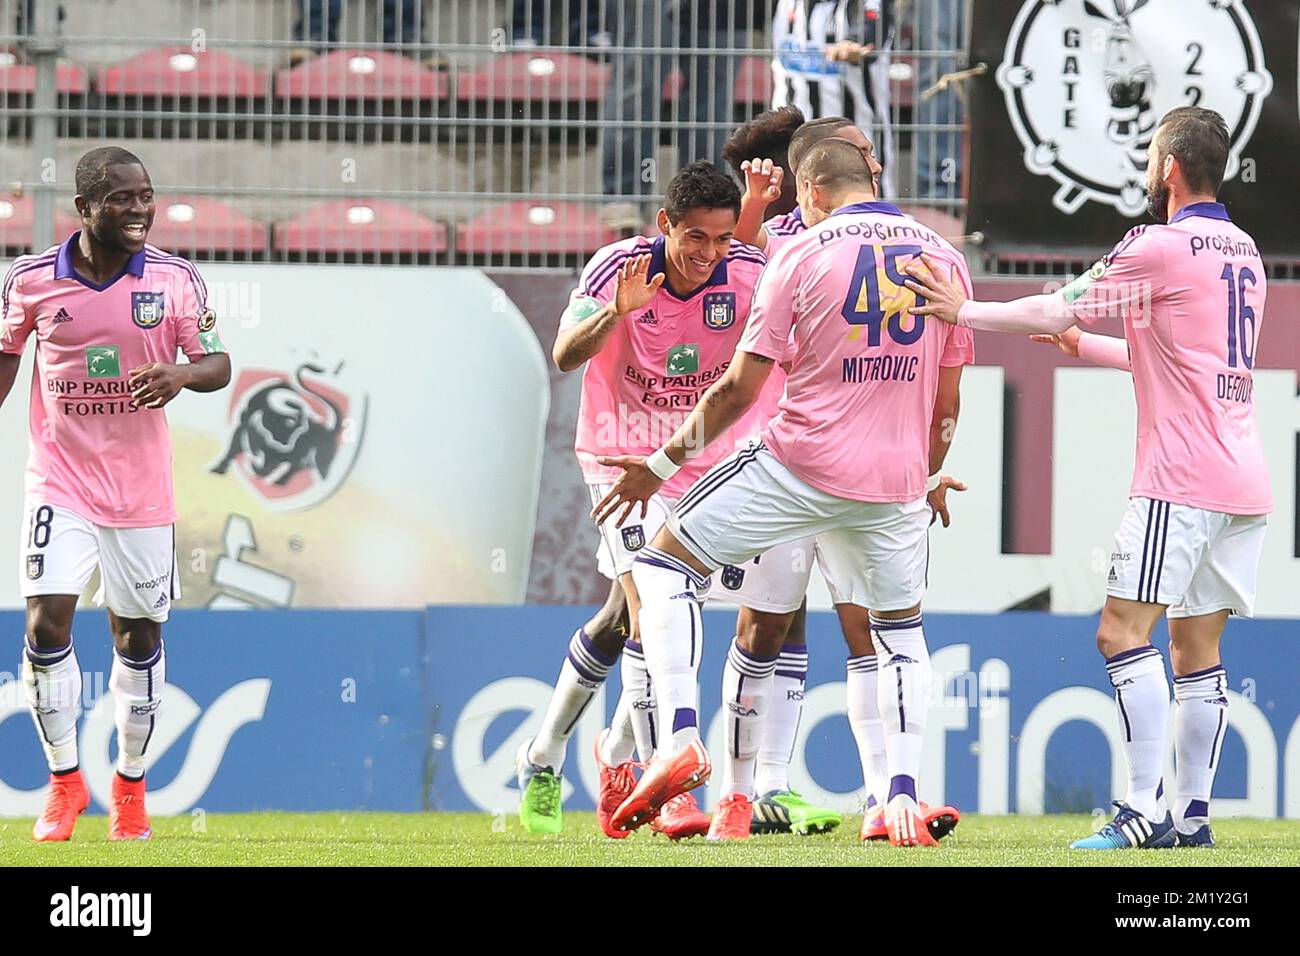 20150503 - CHARLEROI, BELGIUM: Anderlecht's Andy Najar celebrates after scoring the 0-1 goal during the Jupiler Pro League match between Sporting Charleroi and RSC Anderlecht, Sunday 03 May 2015 in Charleroi, on the sixth day of the Play-off 1. BELGA PHOTO BRUNO FAHY Stock Photo